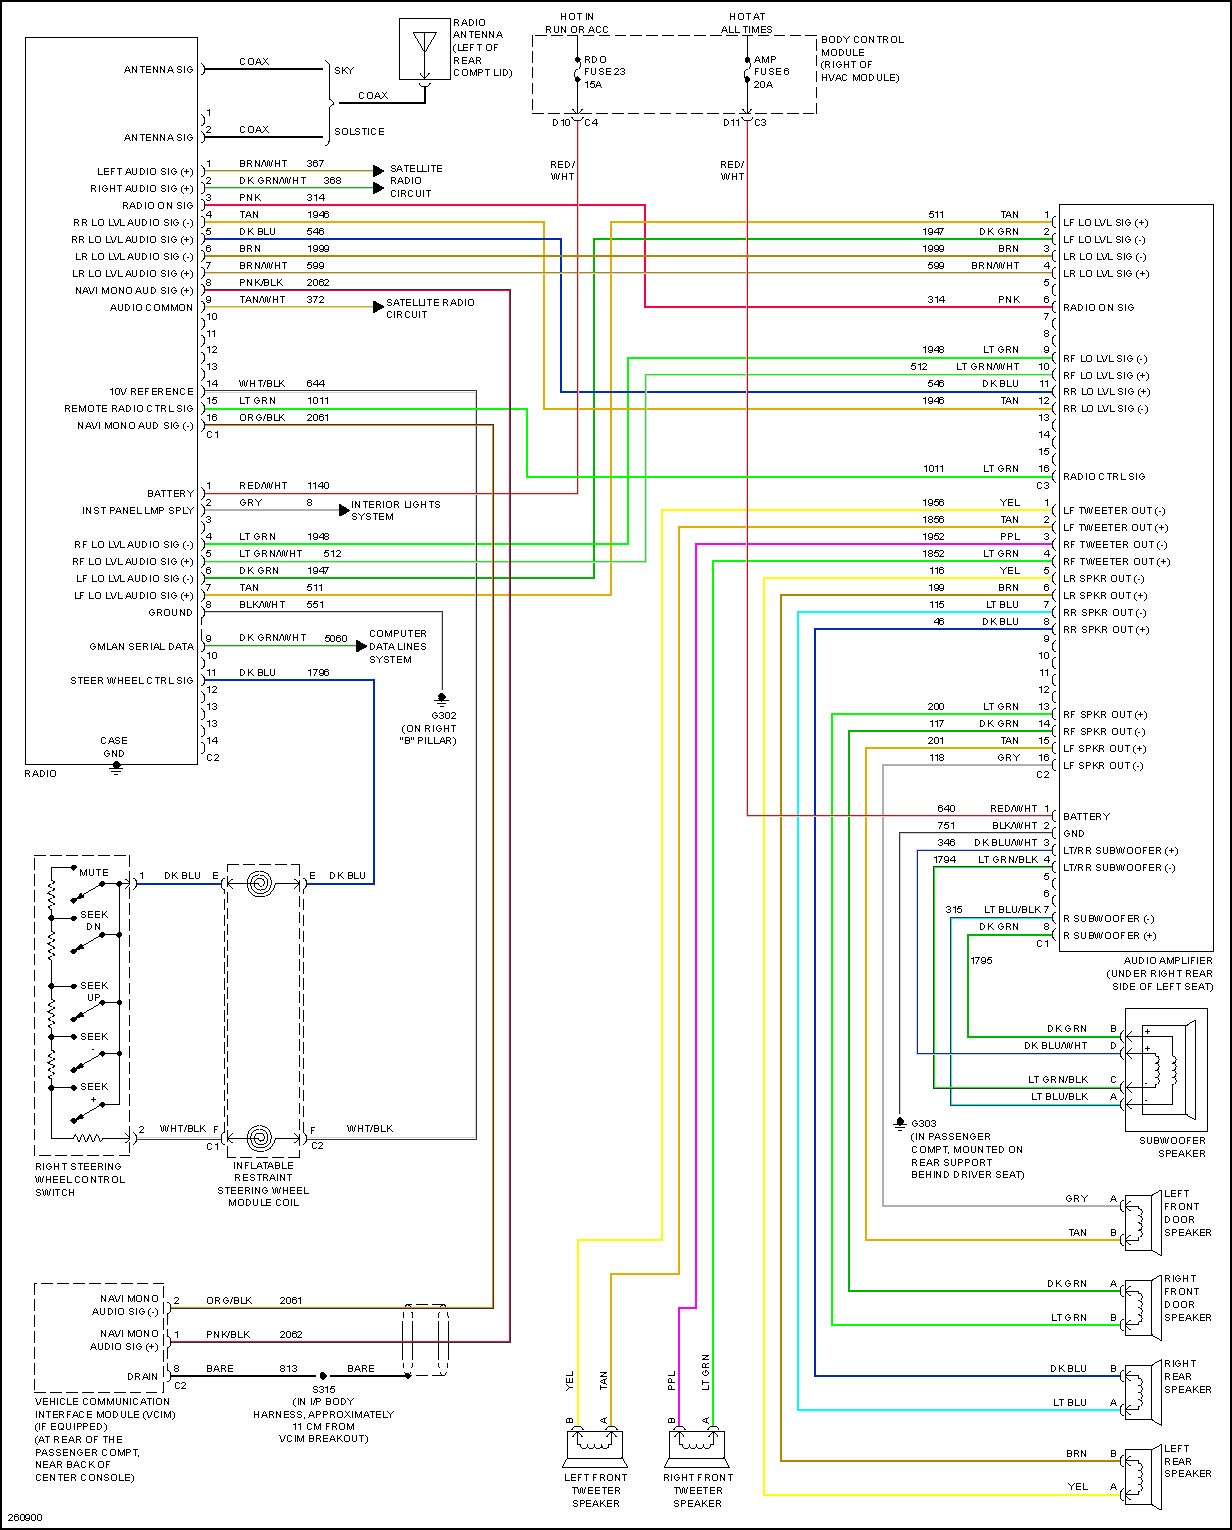 Wiring Diagram For 2007 Pontiac G6 The And In WIRING DIAGRAM Within 2006 Grand Prix